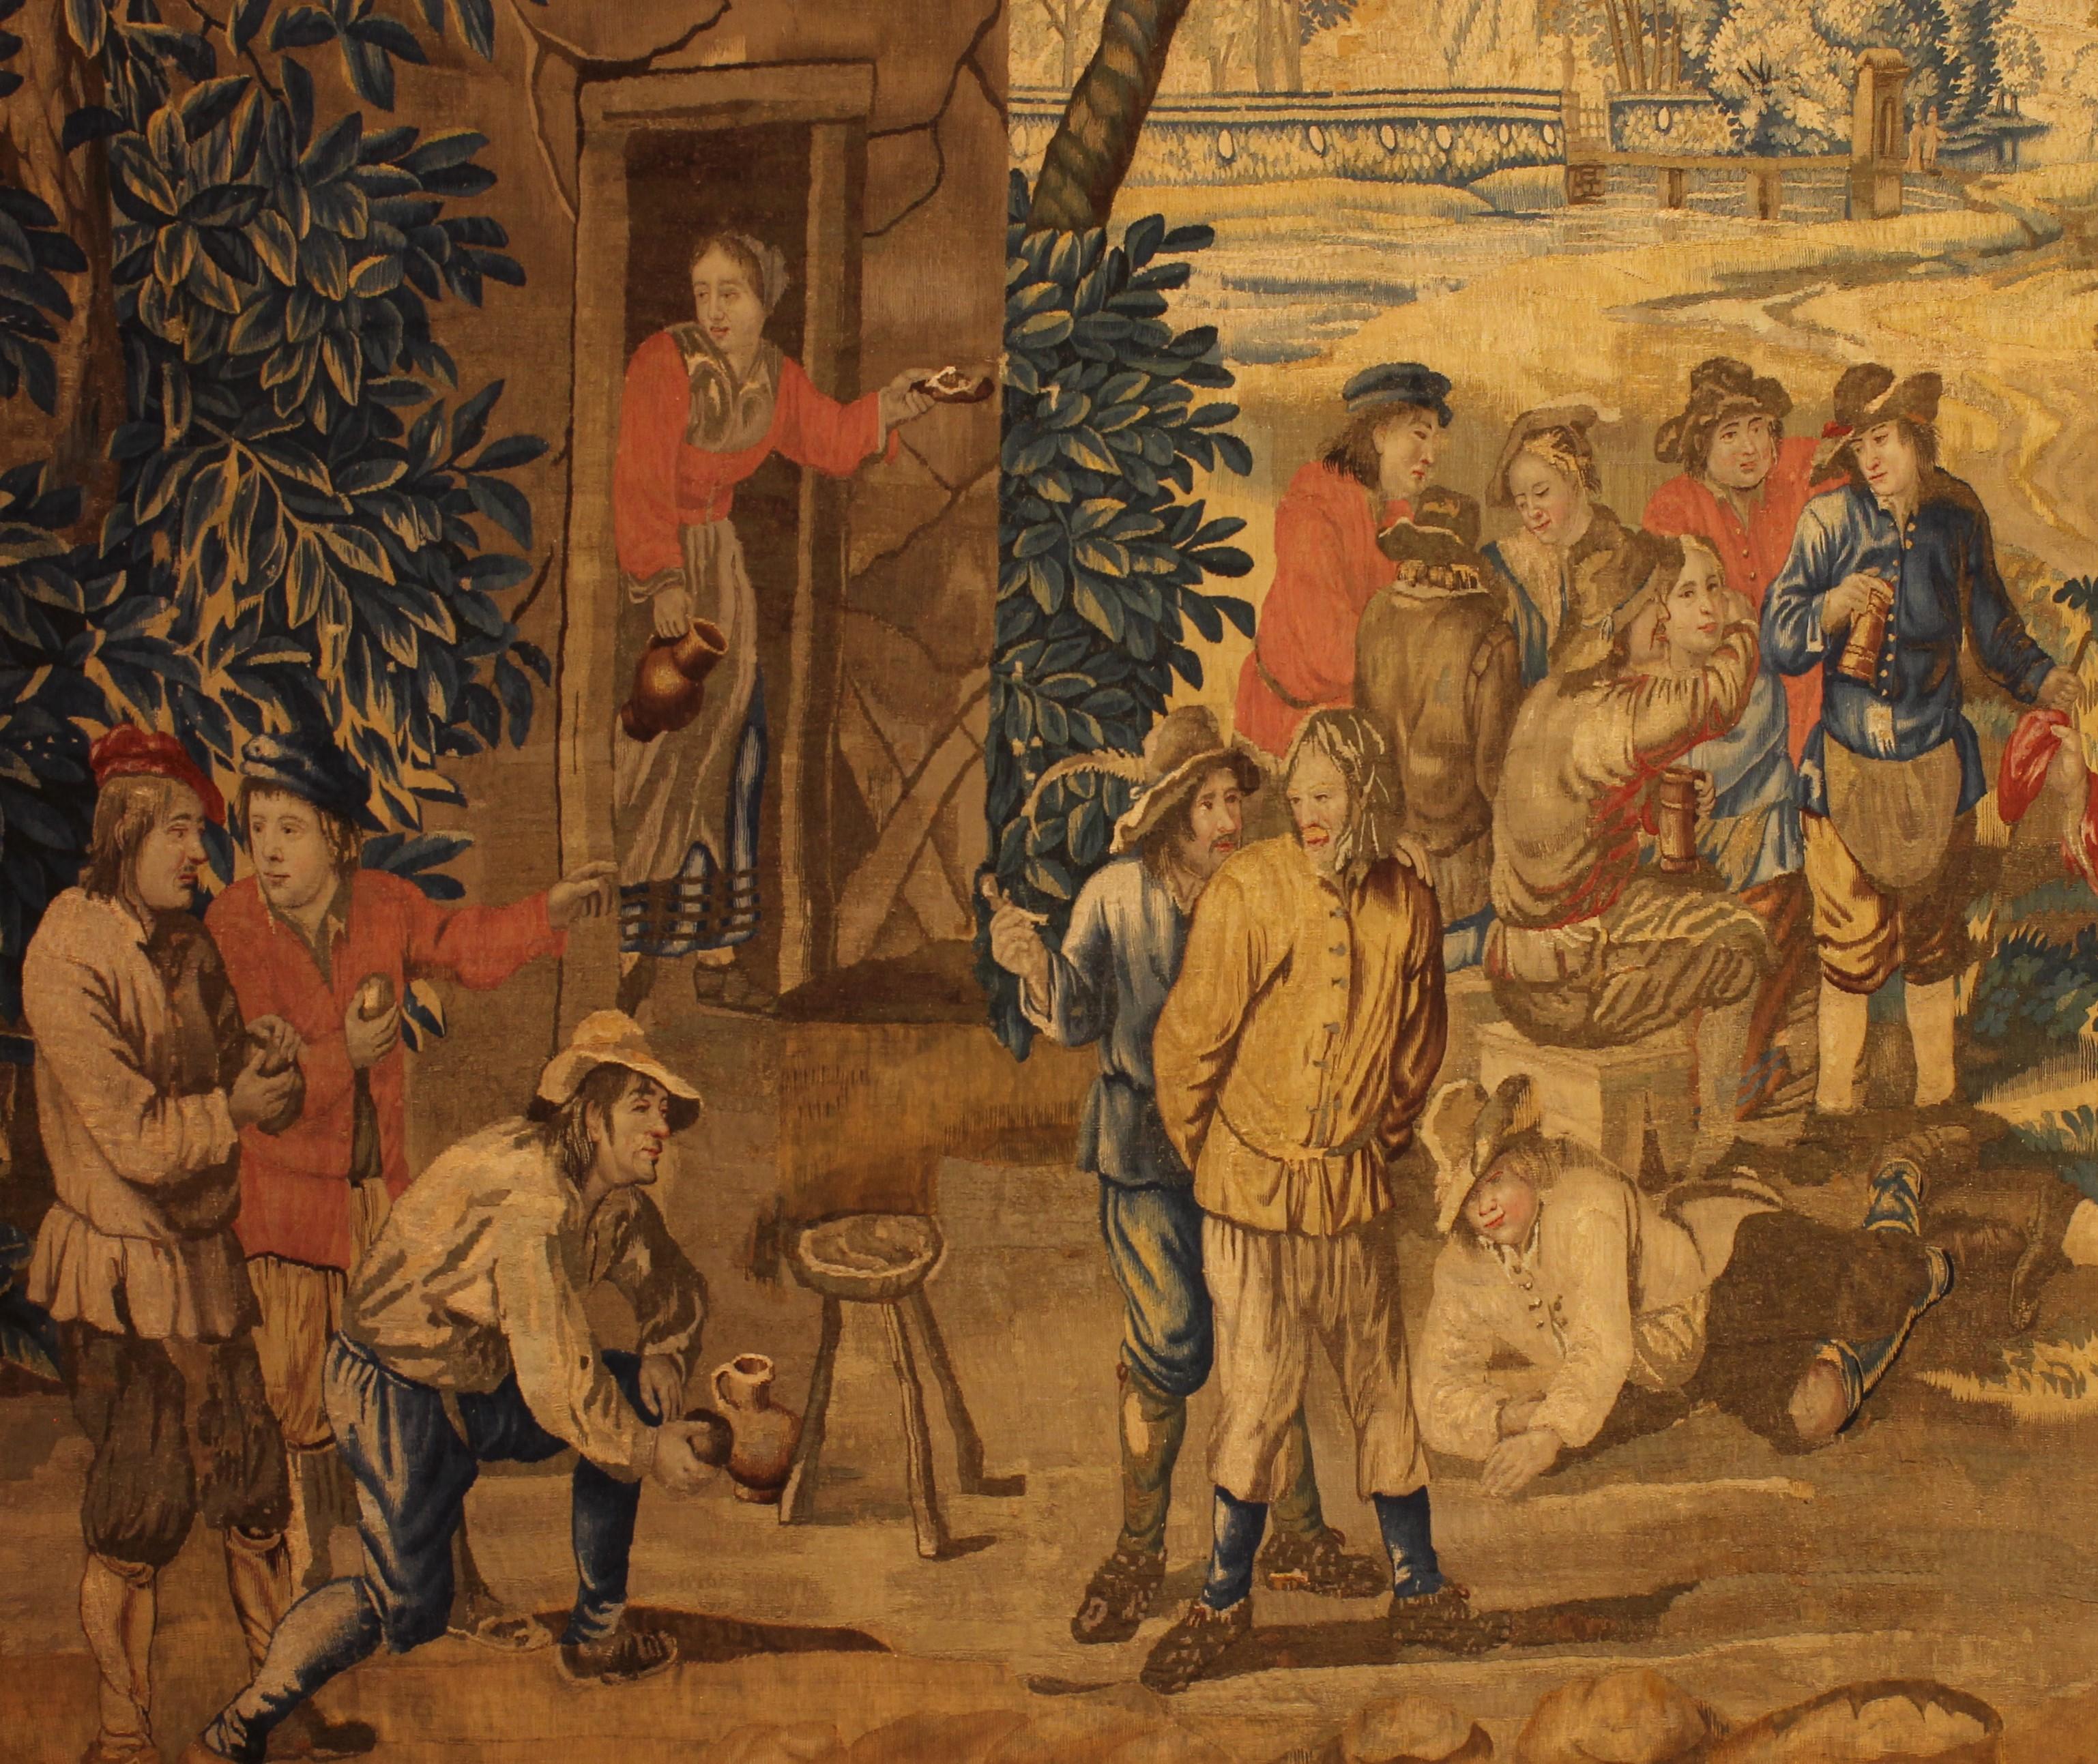 Brussels Tapestry After Teniers from the beginning of the 18th century

Very beautiful tapestry describing a village scene at the end of the 17th century / beginning of the 18th century
superb quality of execution with a tapestry entirely in